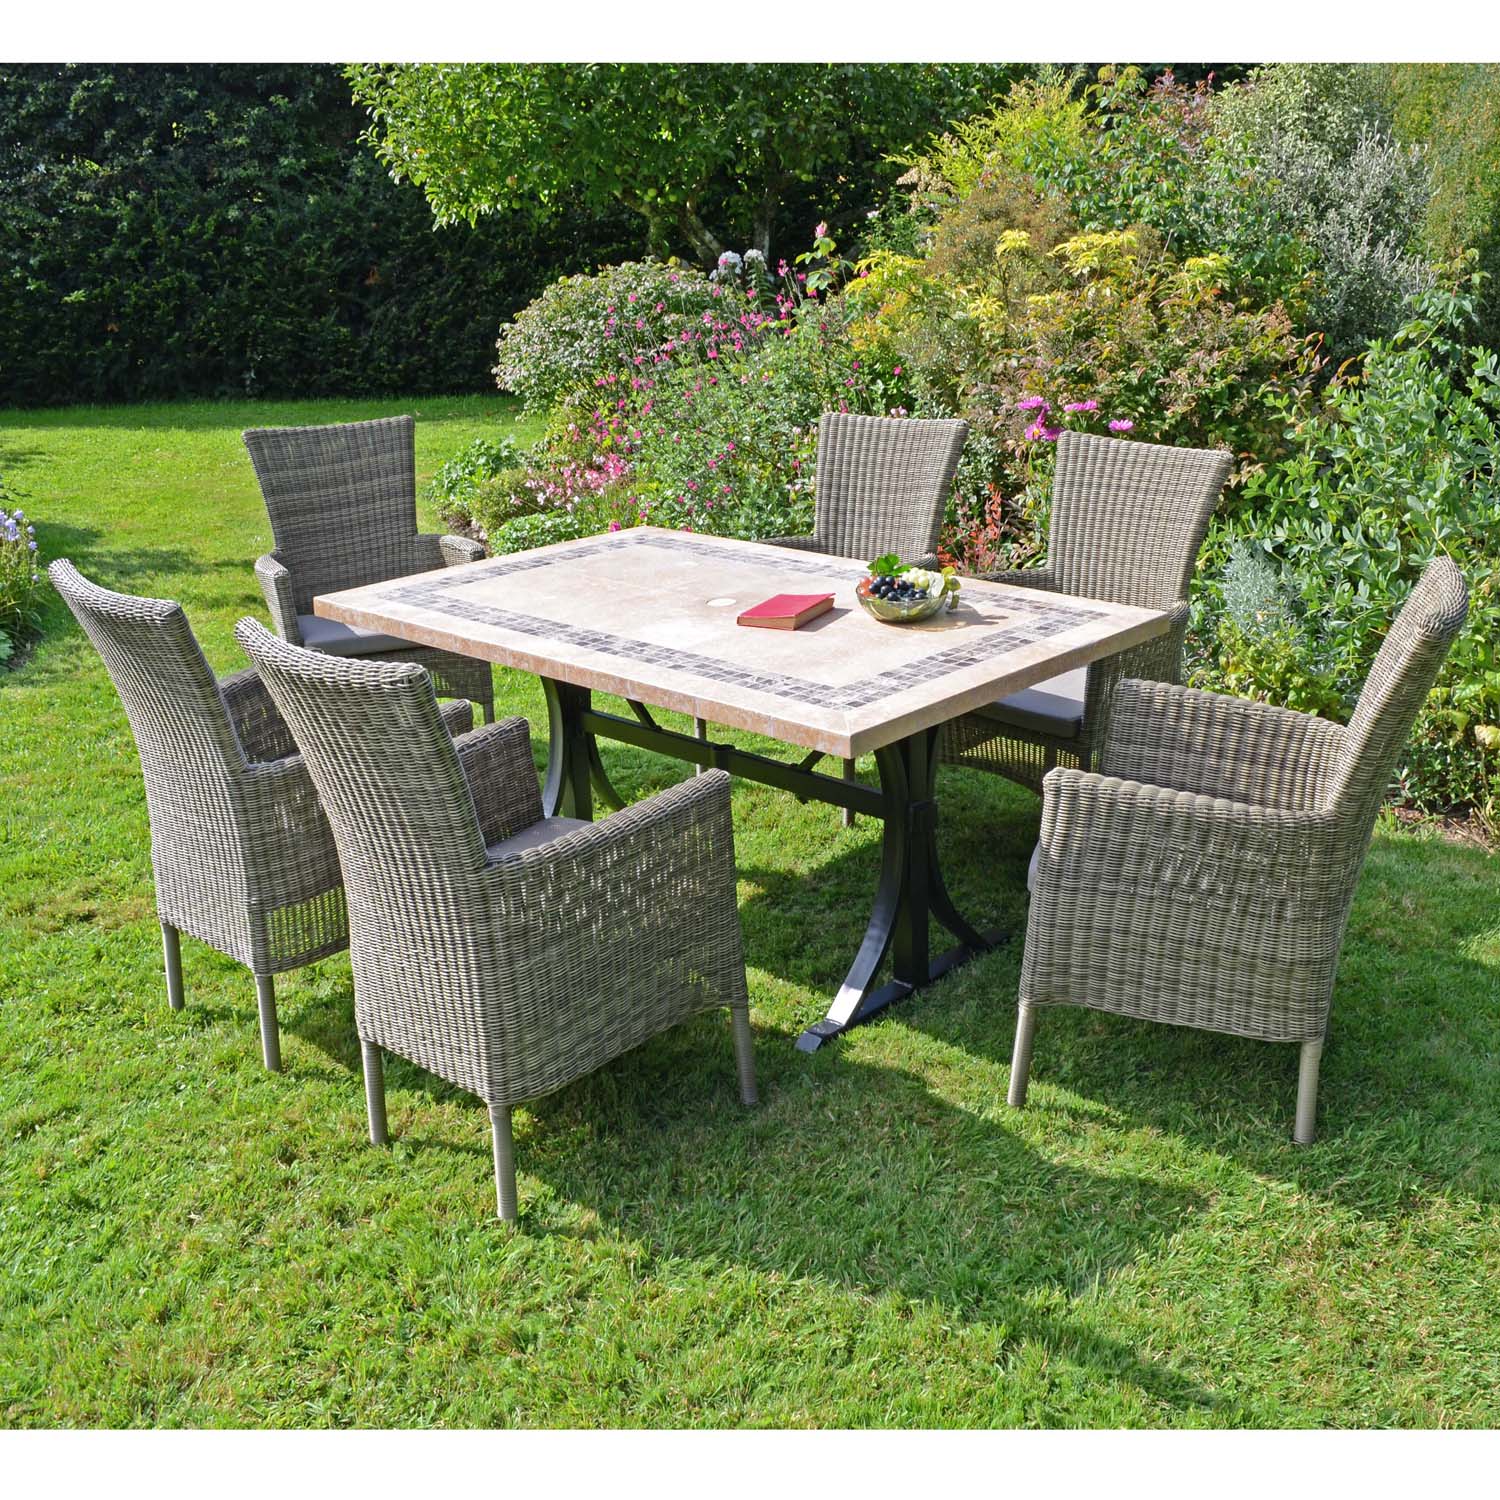 Byron Manor Charleston Stone Garden Dining Table with 6 Dorchester Wicker Chairs Set Dining Sets Byron Manor   